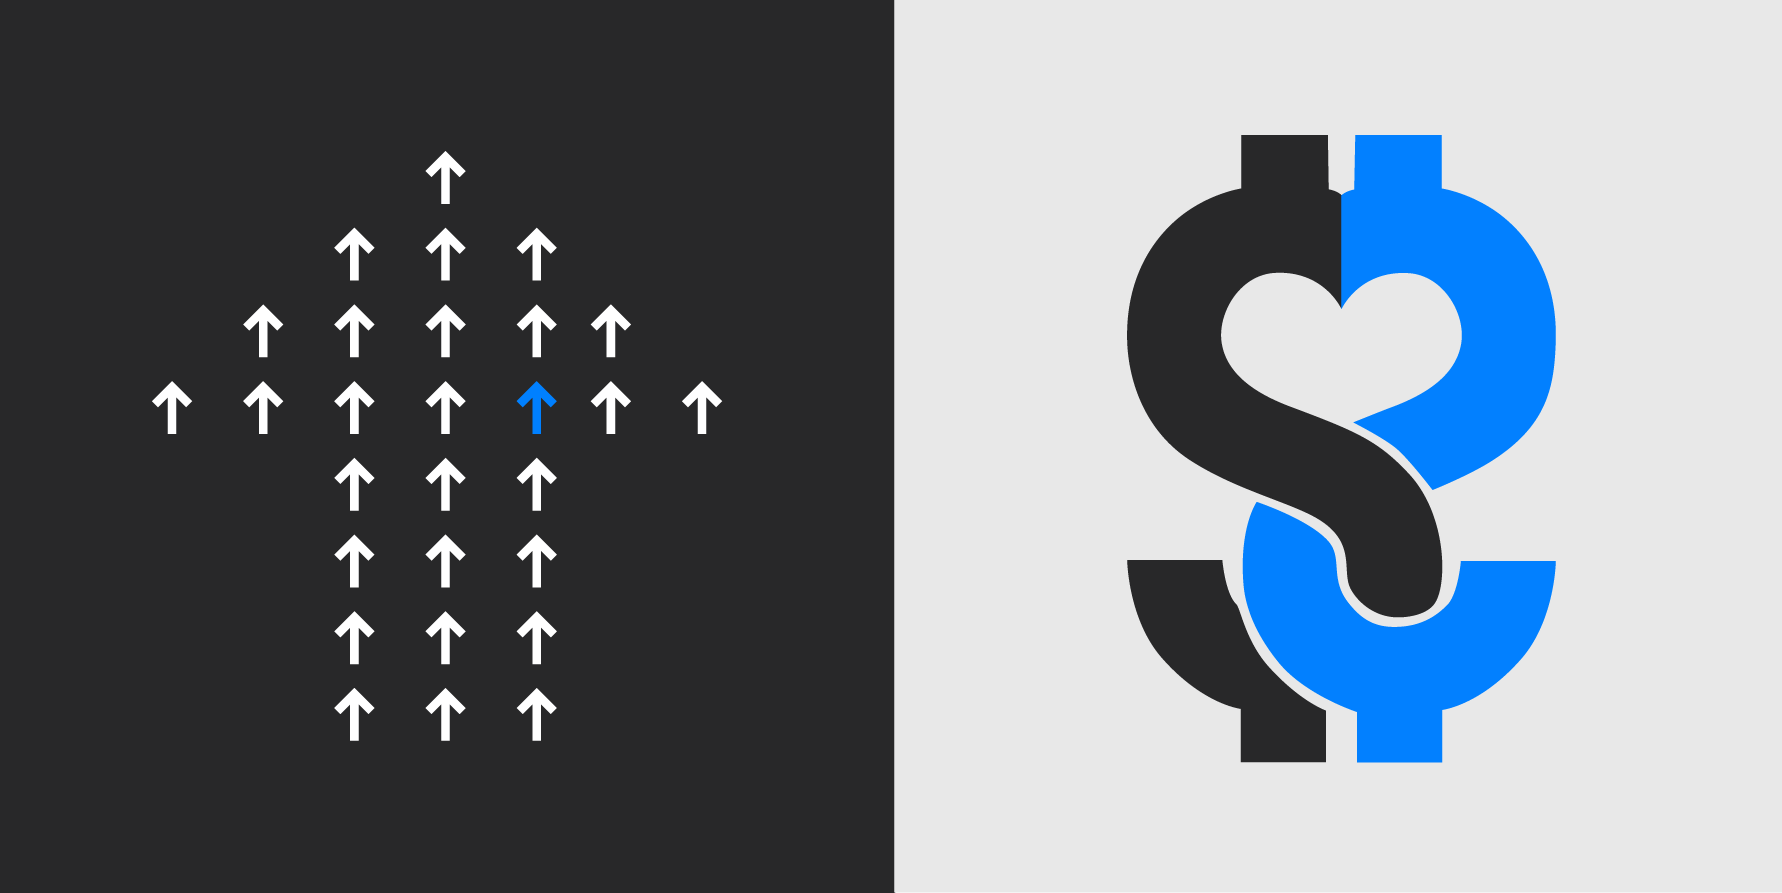 Stylistic illustration of a large arrow made out of smaller arrows next to an illustration of two intertwined dollar signs